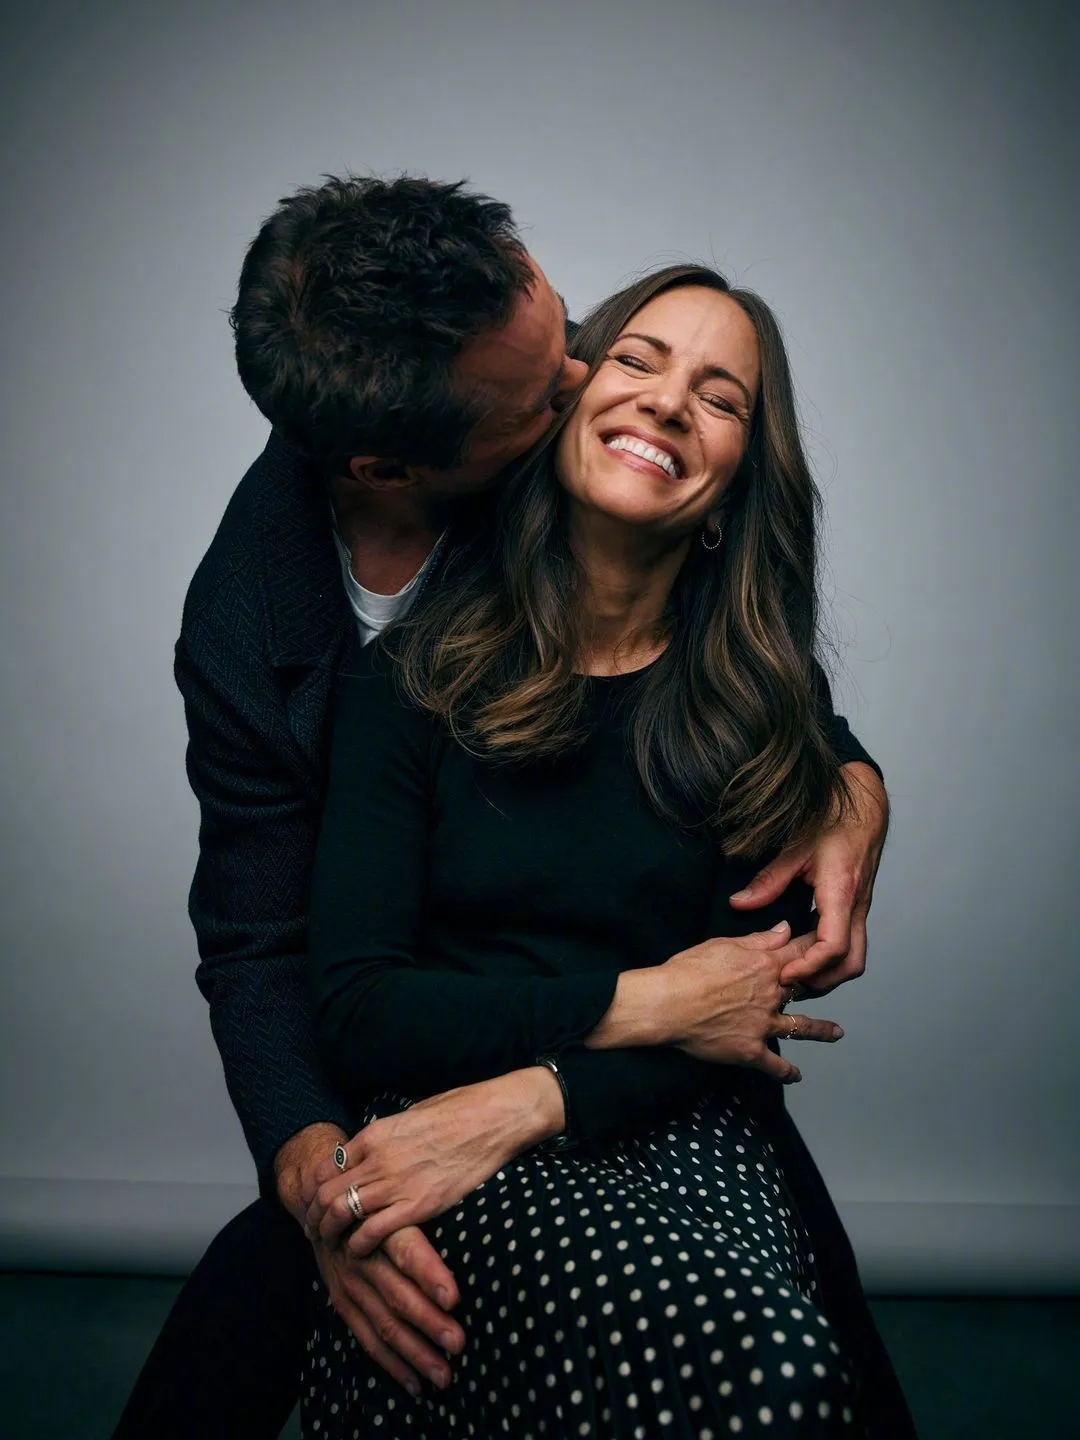 Valentine's Day Photoshoot of Robert Downey Jr. and Susan Downey | FMV6